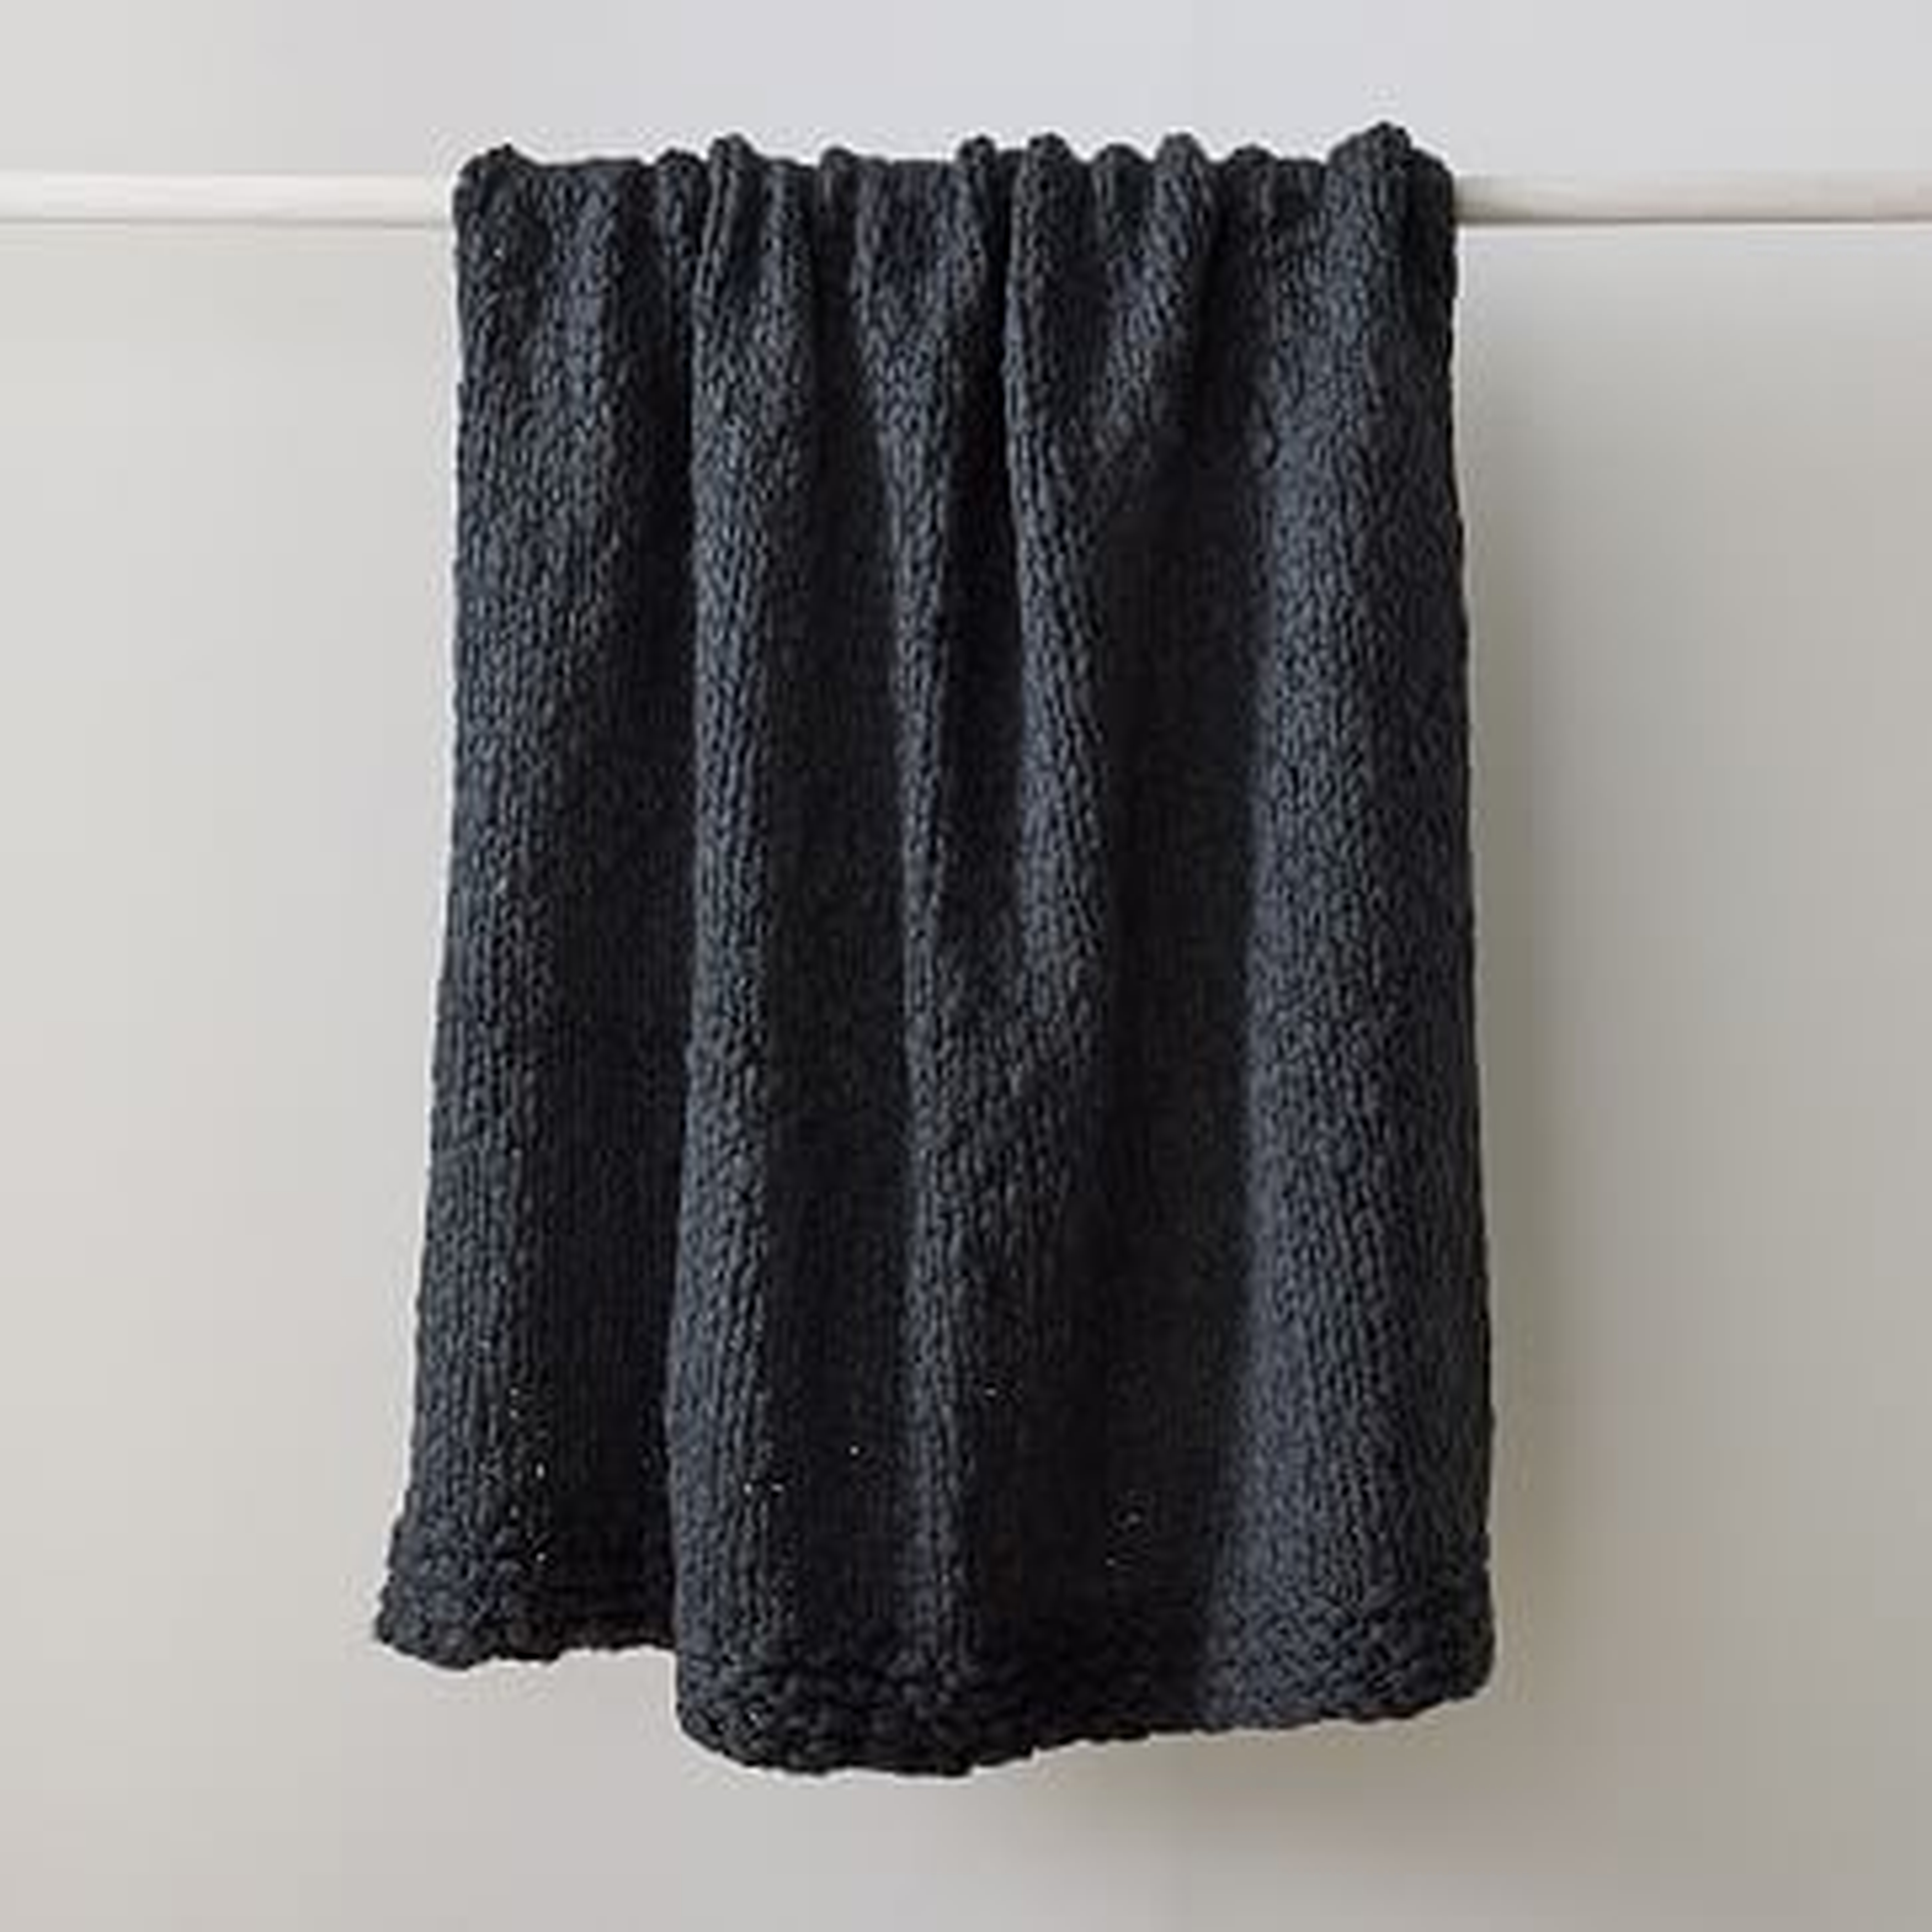 Wool Knit Throw, 50"x60", Charcoal - West Elm